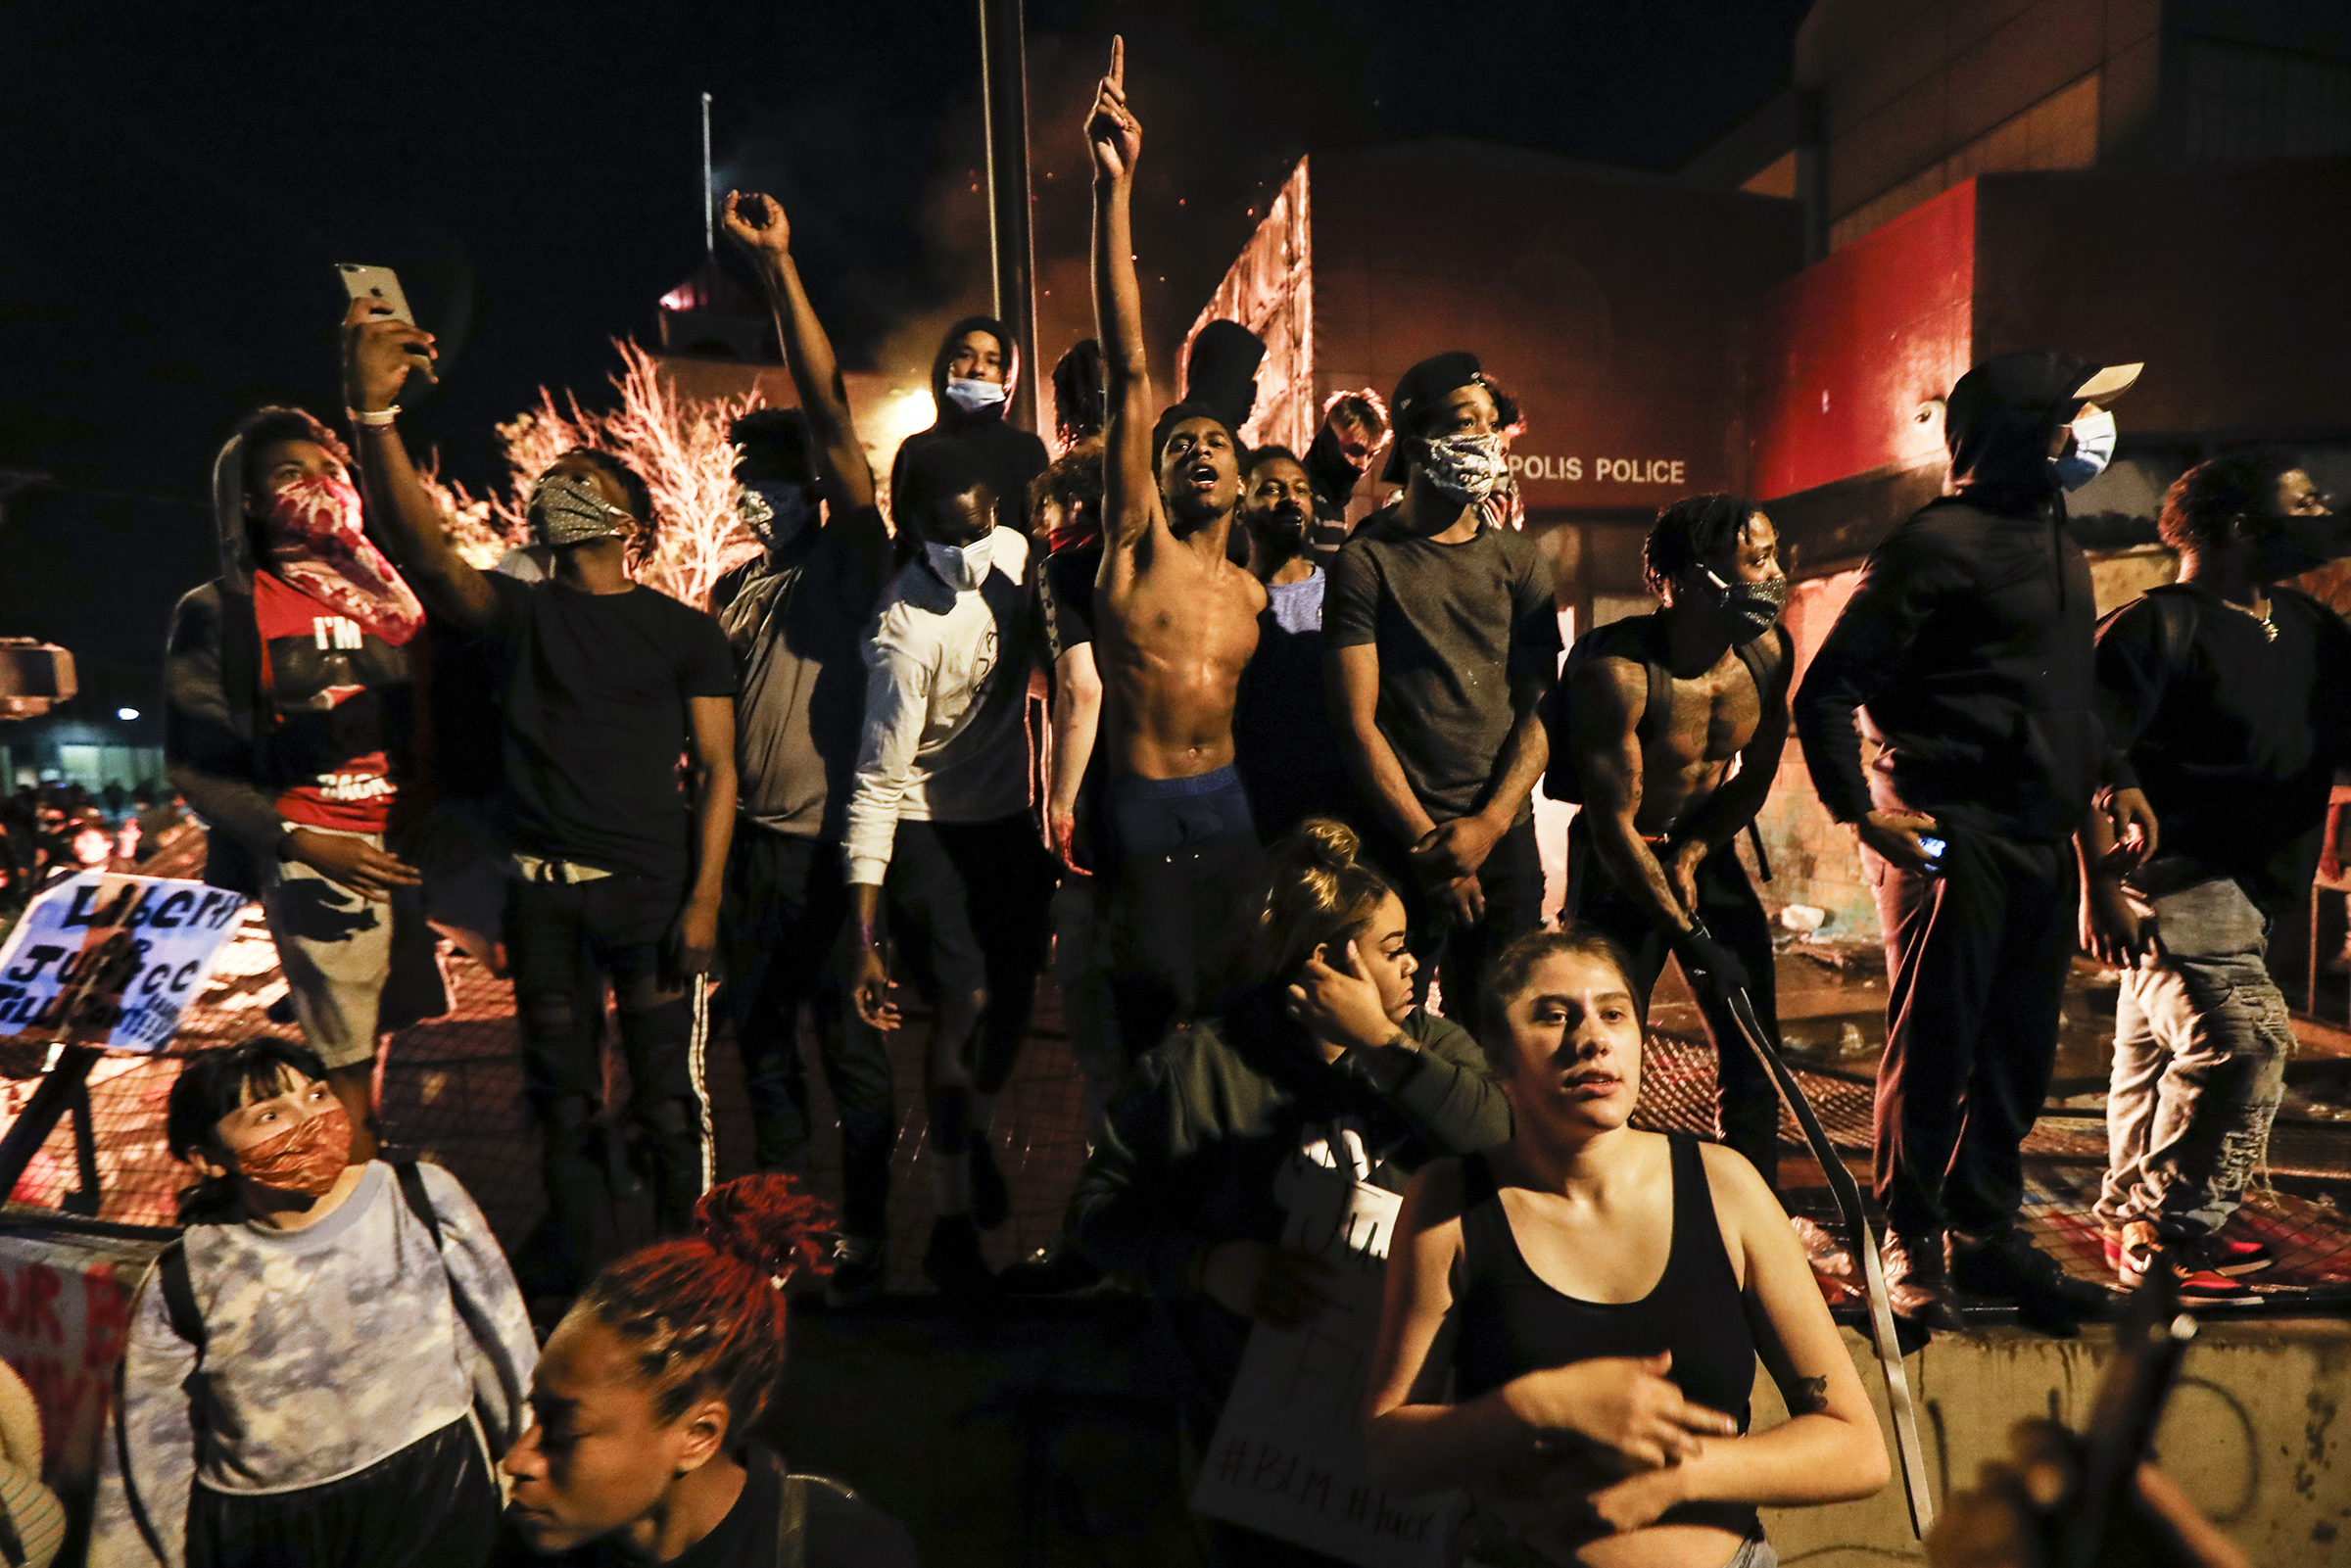 Protesters demonstrate outside of the burning precinct on May 28. (John Minchillo—AP)